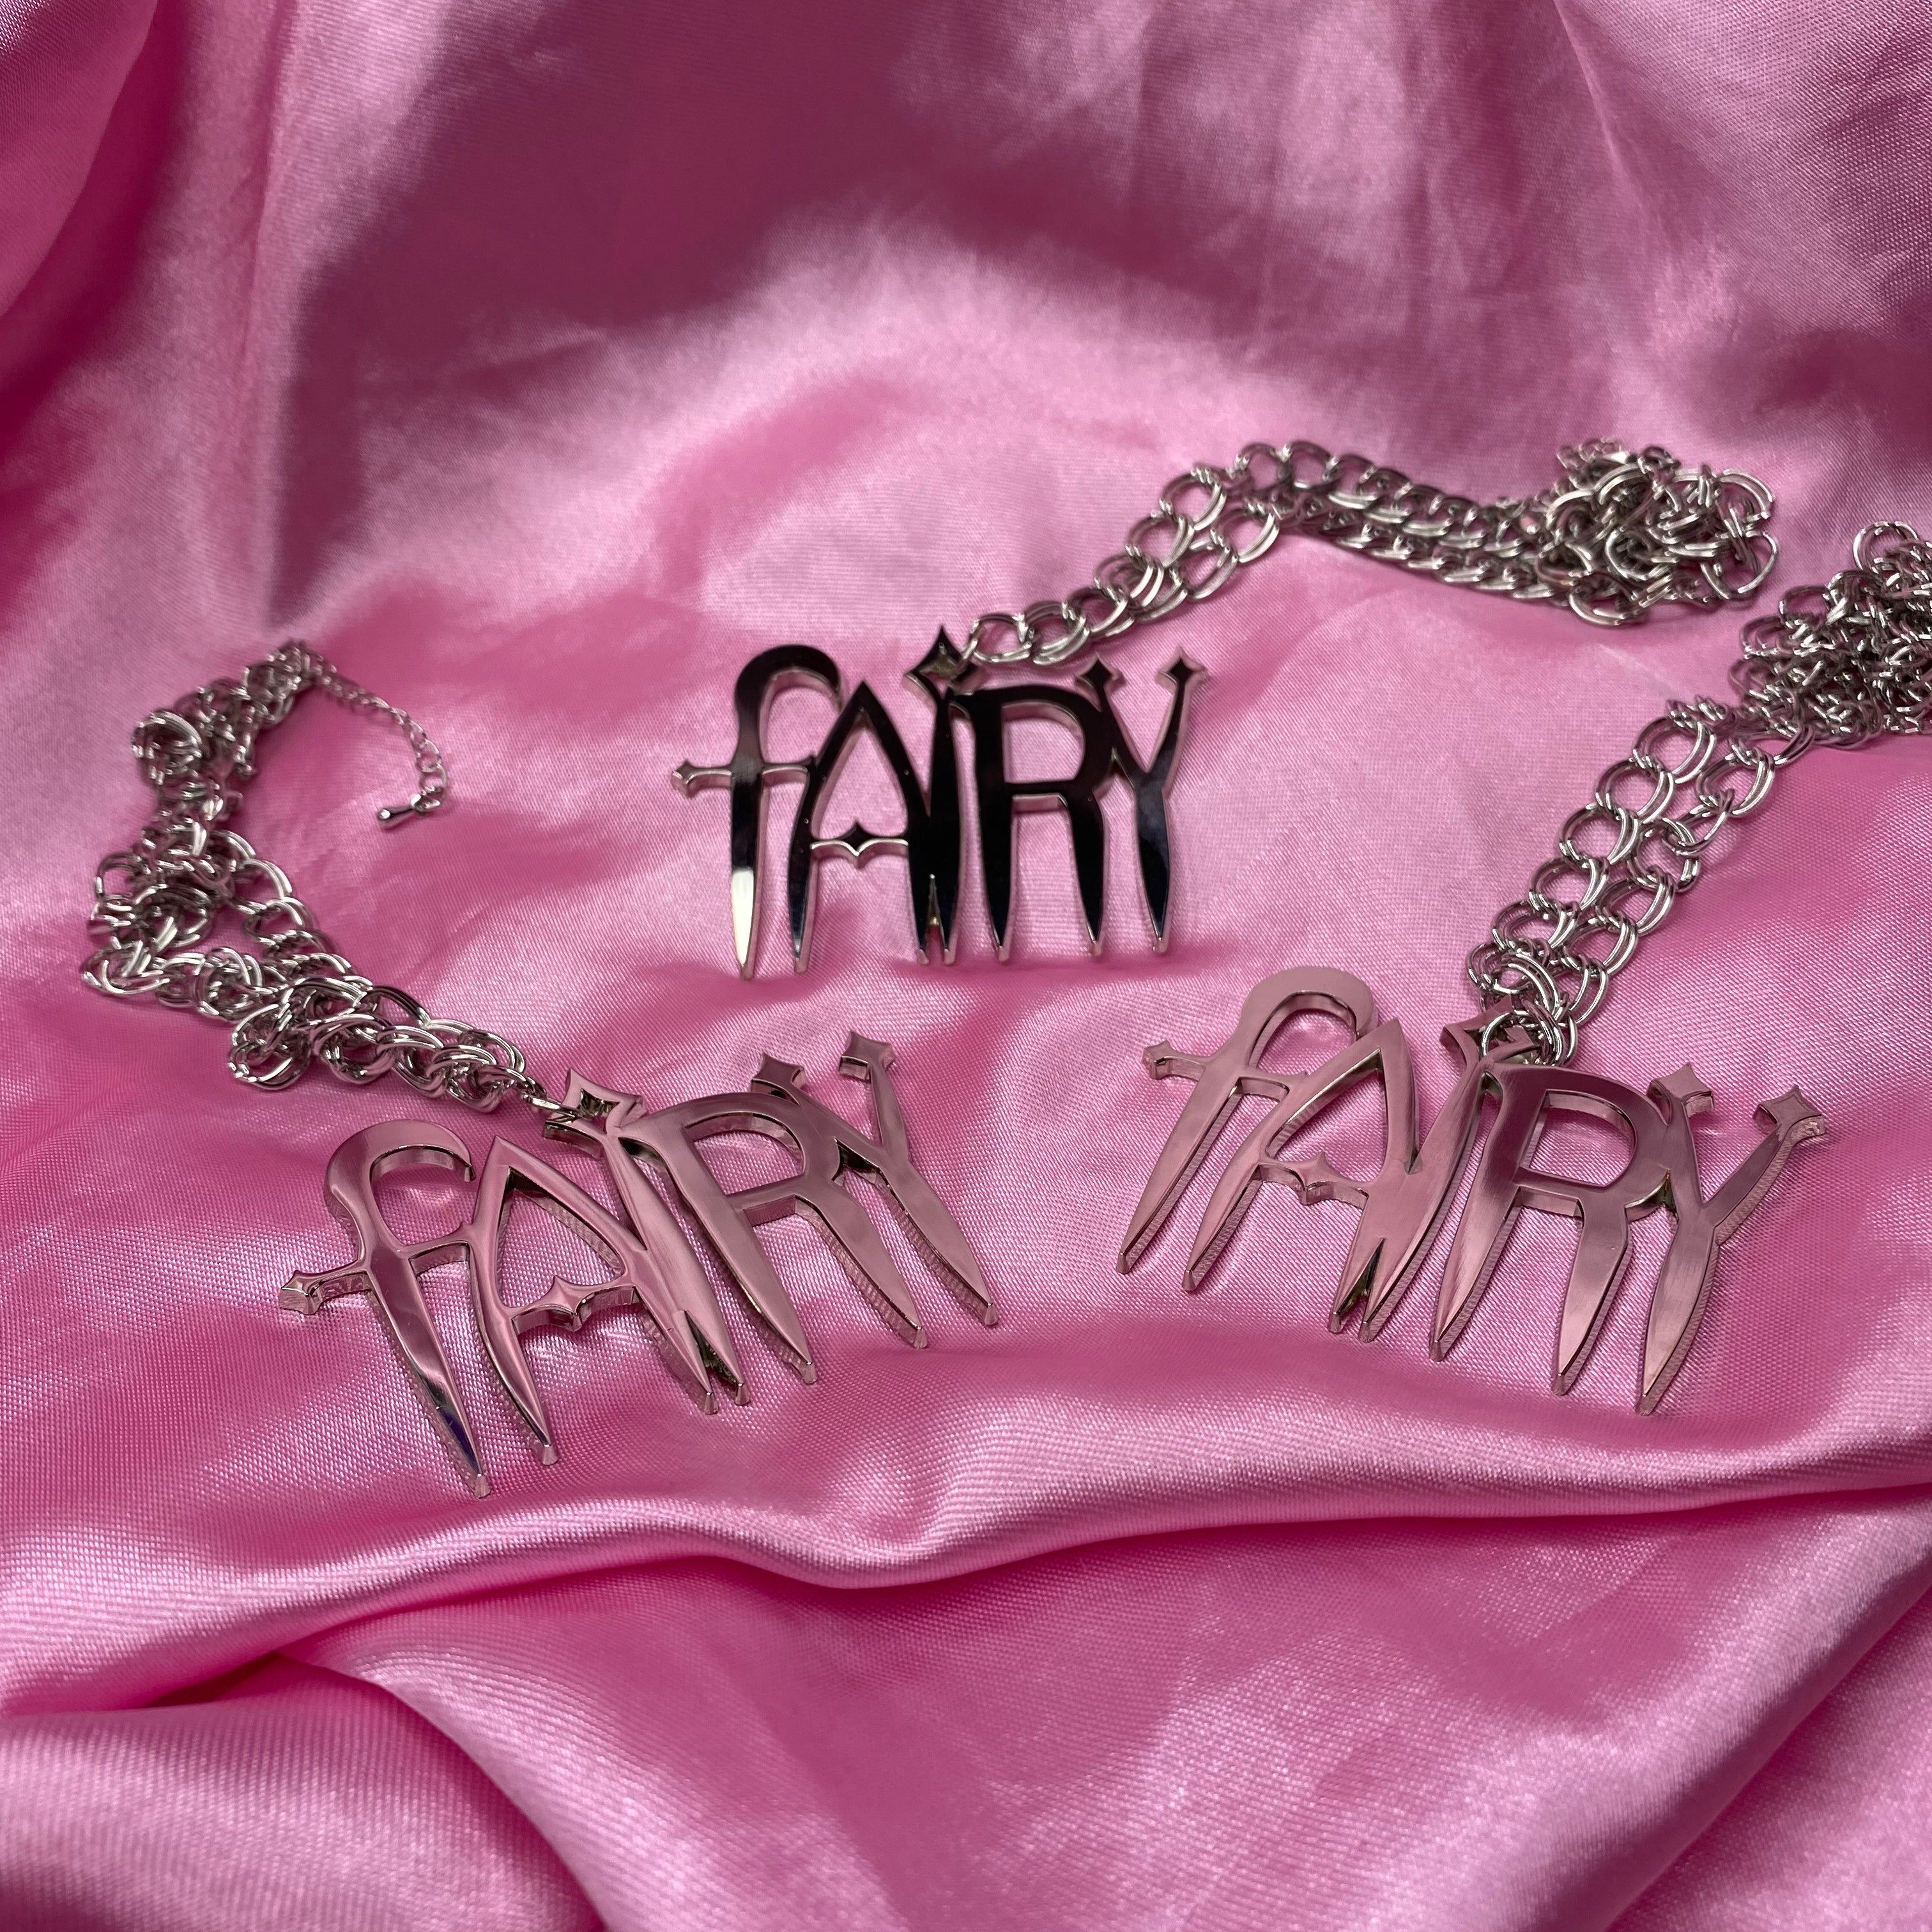 Two Fairy chains laying on a pink silk background - Rogue